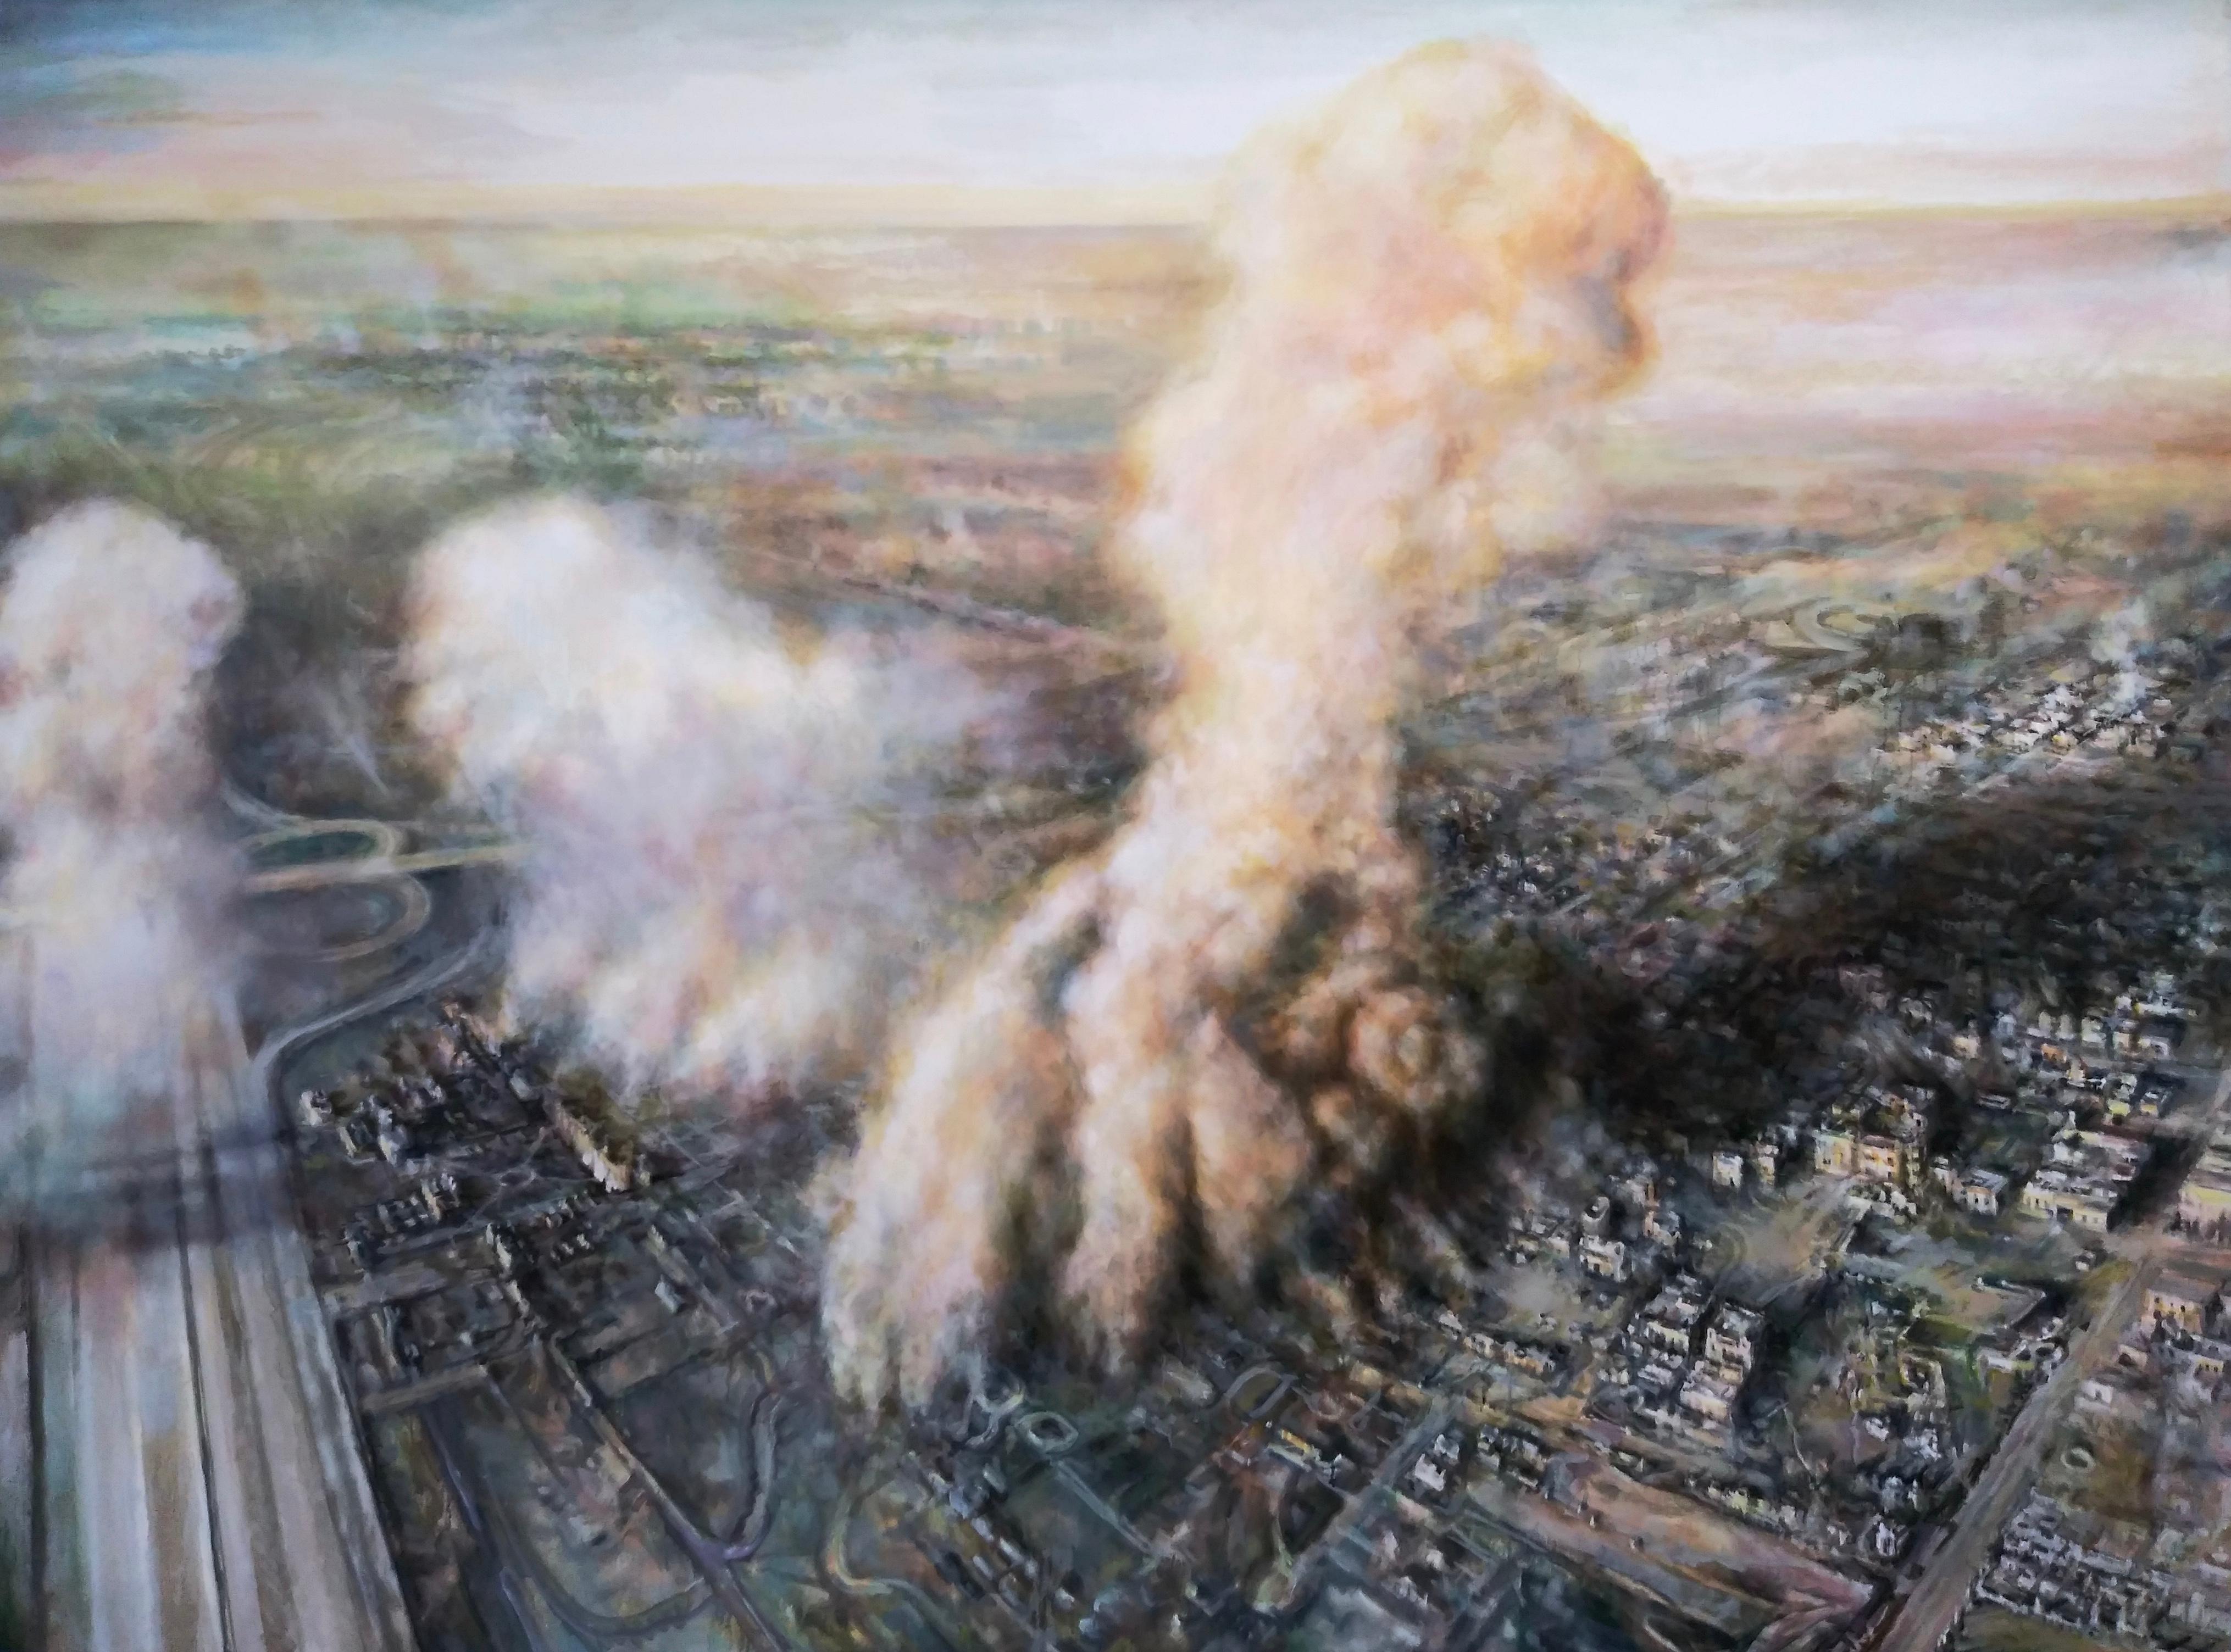 Russian Drone Painting No. 3 (Damascus, 2015)